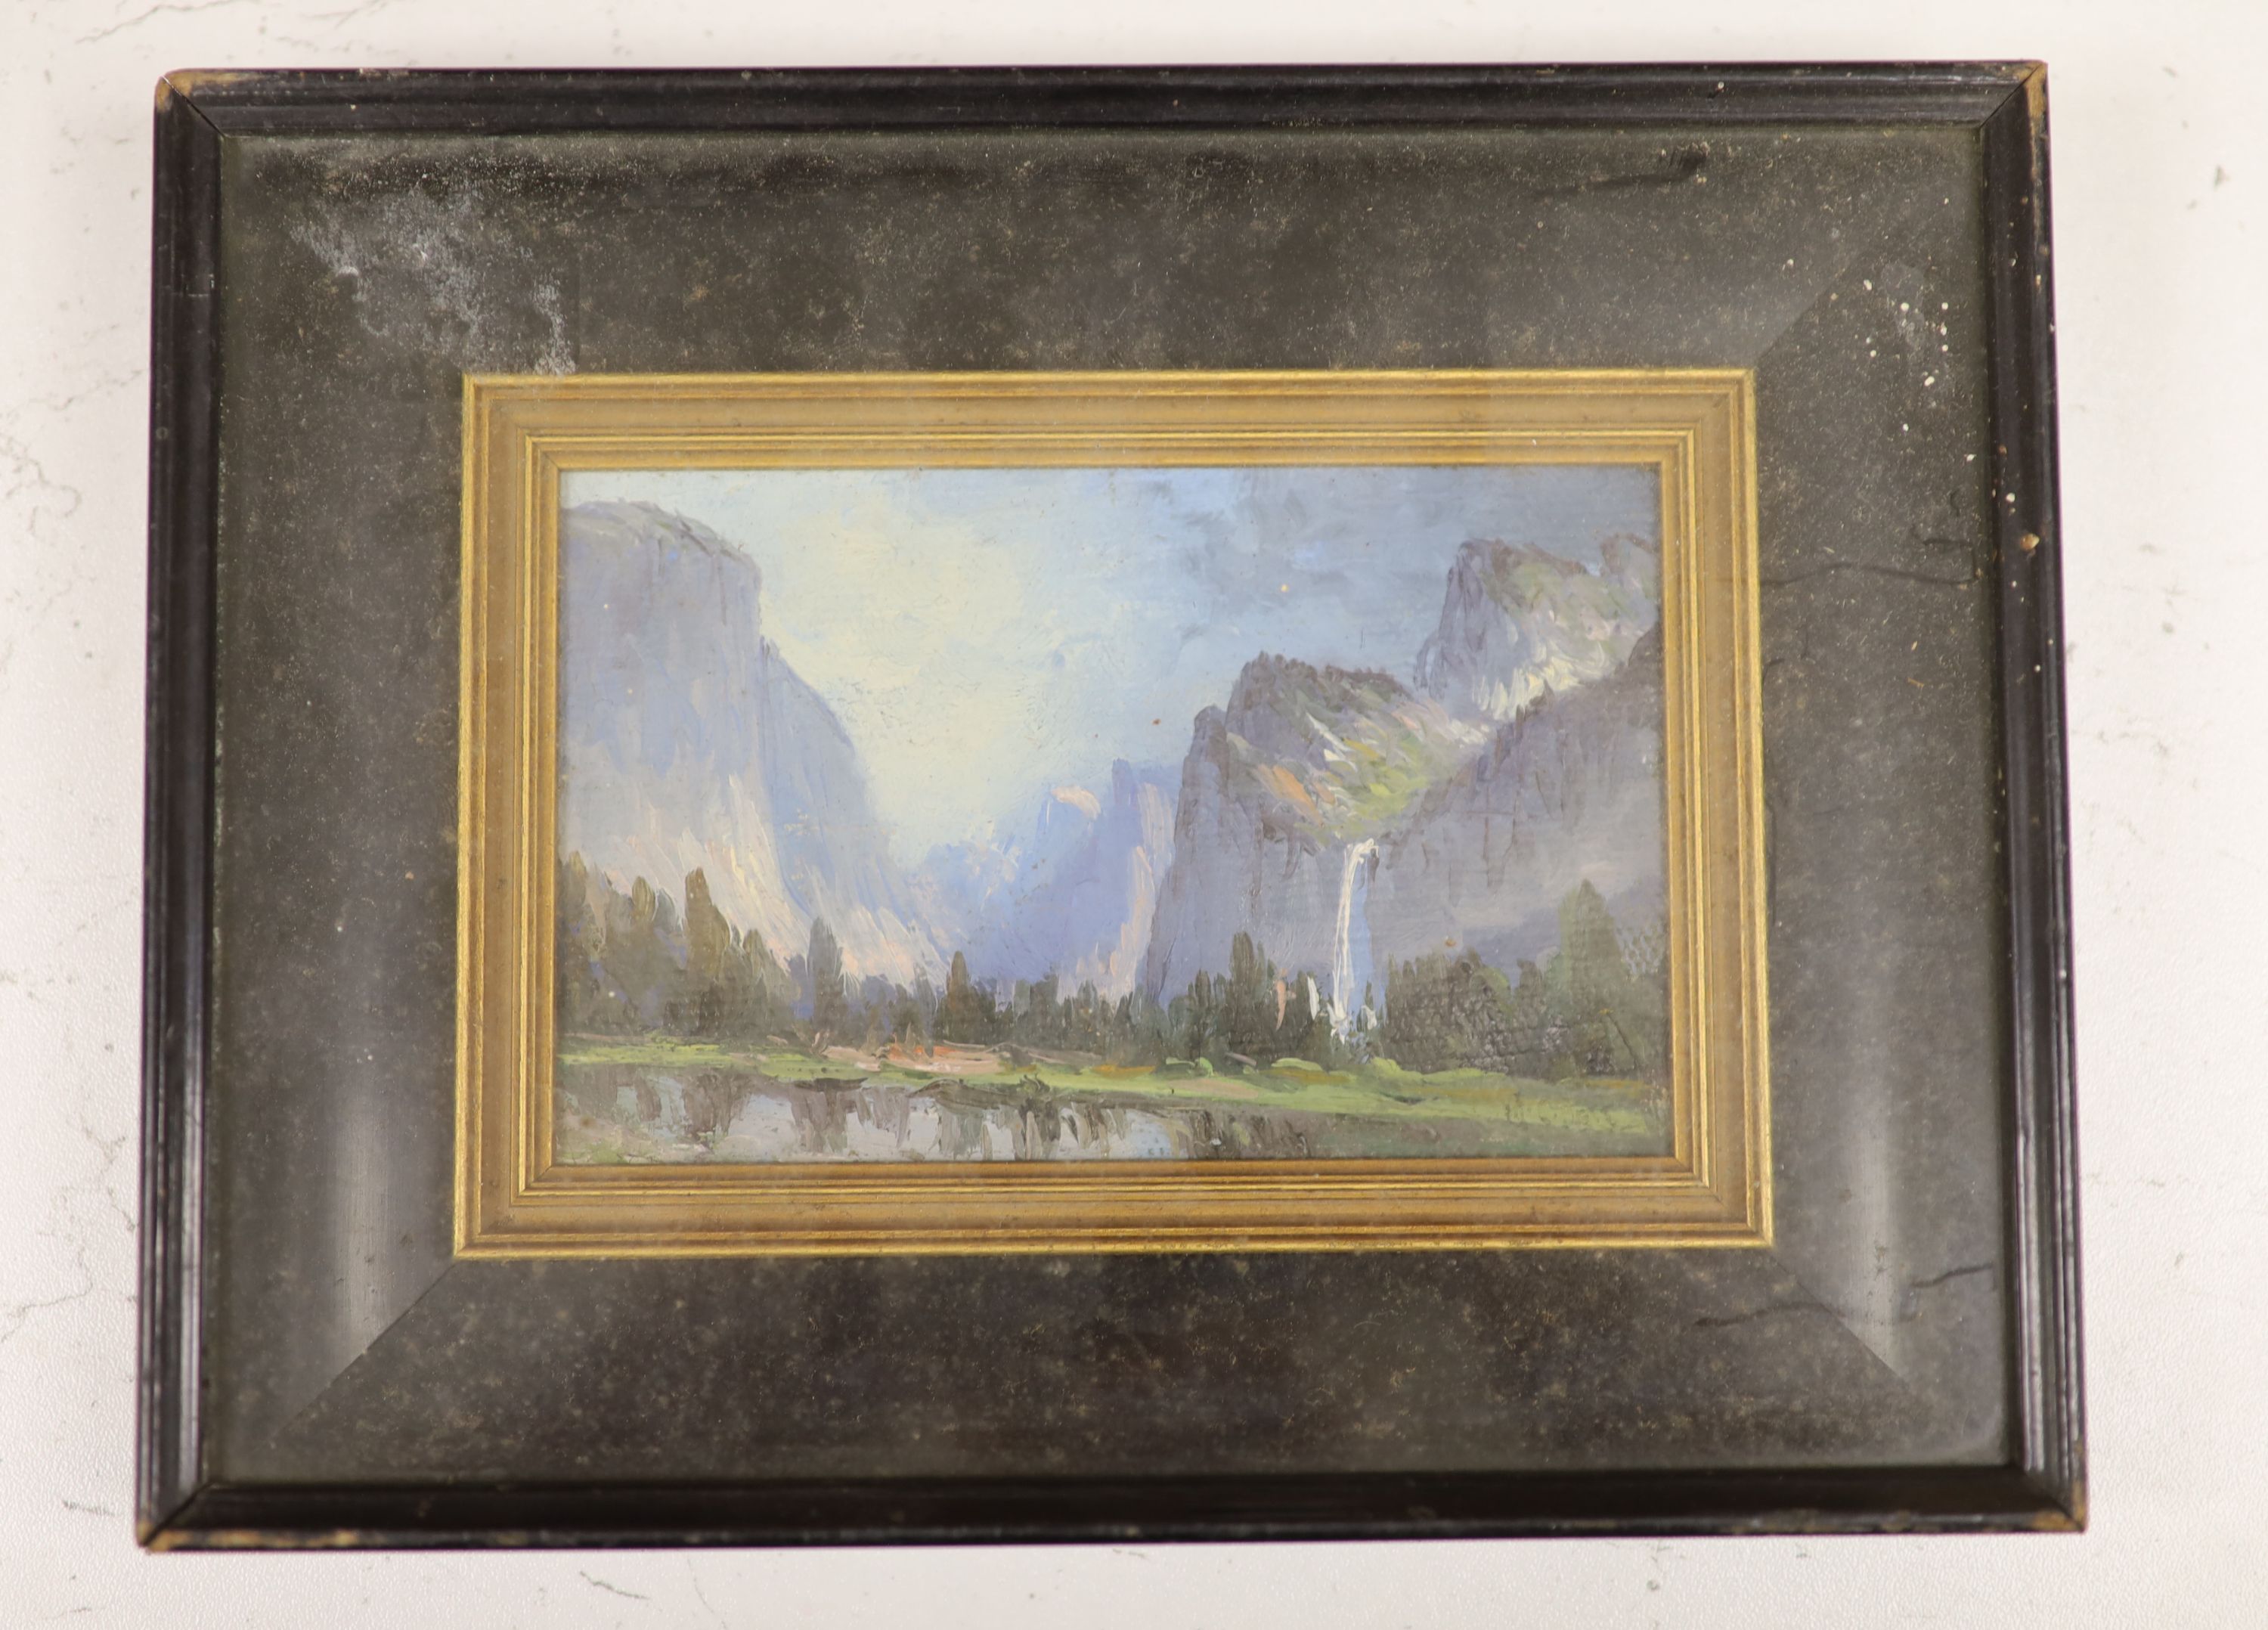 Arthur W. Best (American, 1859-1935), oil on canvas, 'Yossemite Valley, San Francisco', inscribed verso and dated 1912, 8 x 13cm